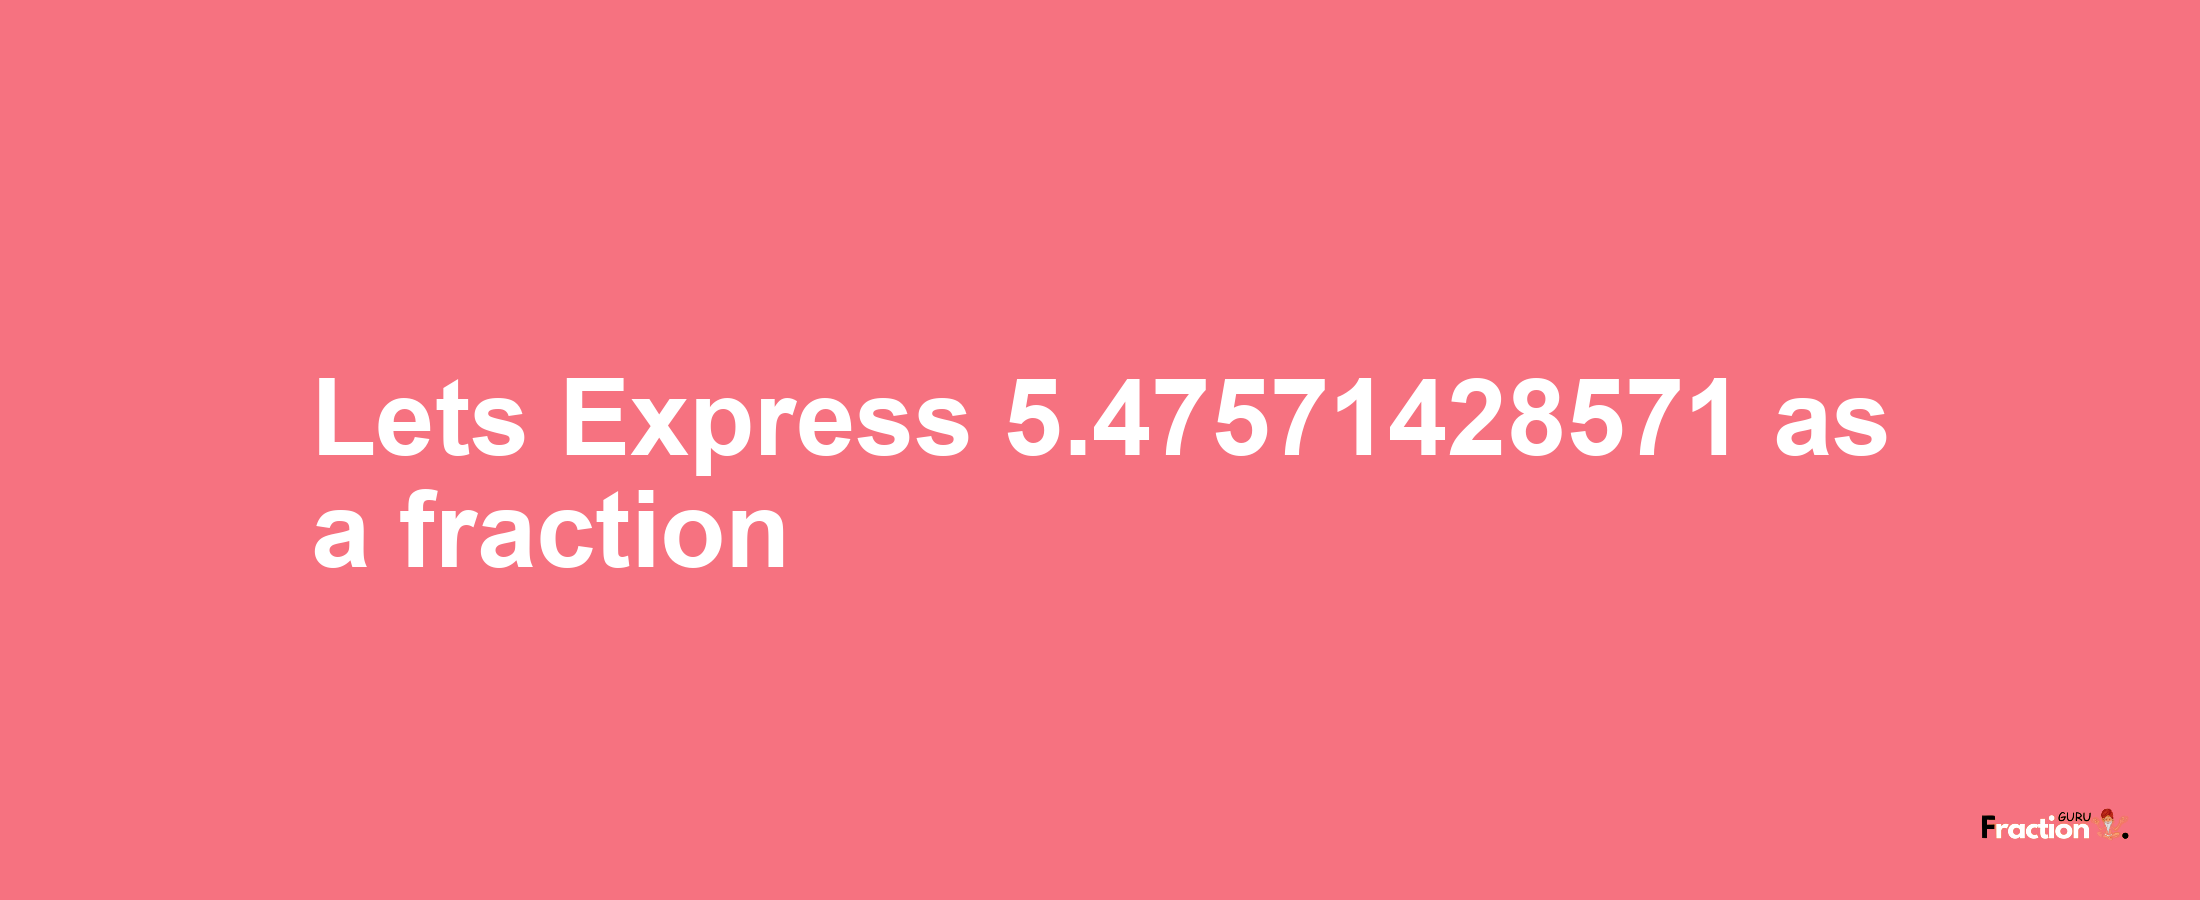 Lets Express 5.47571428571 as afraction